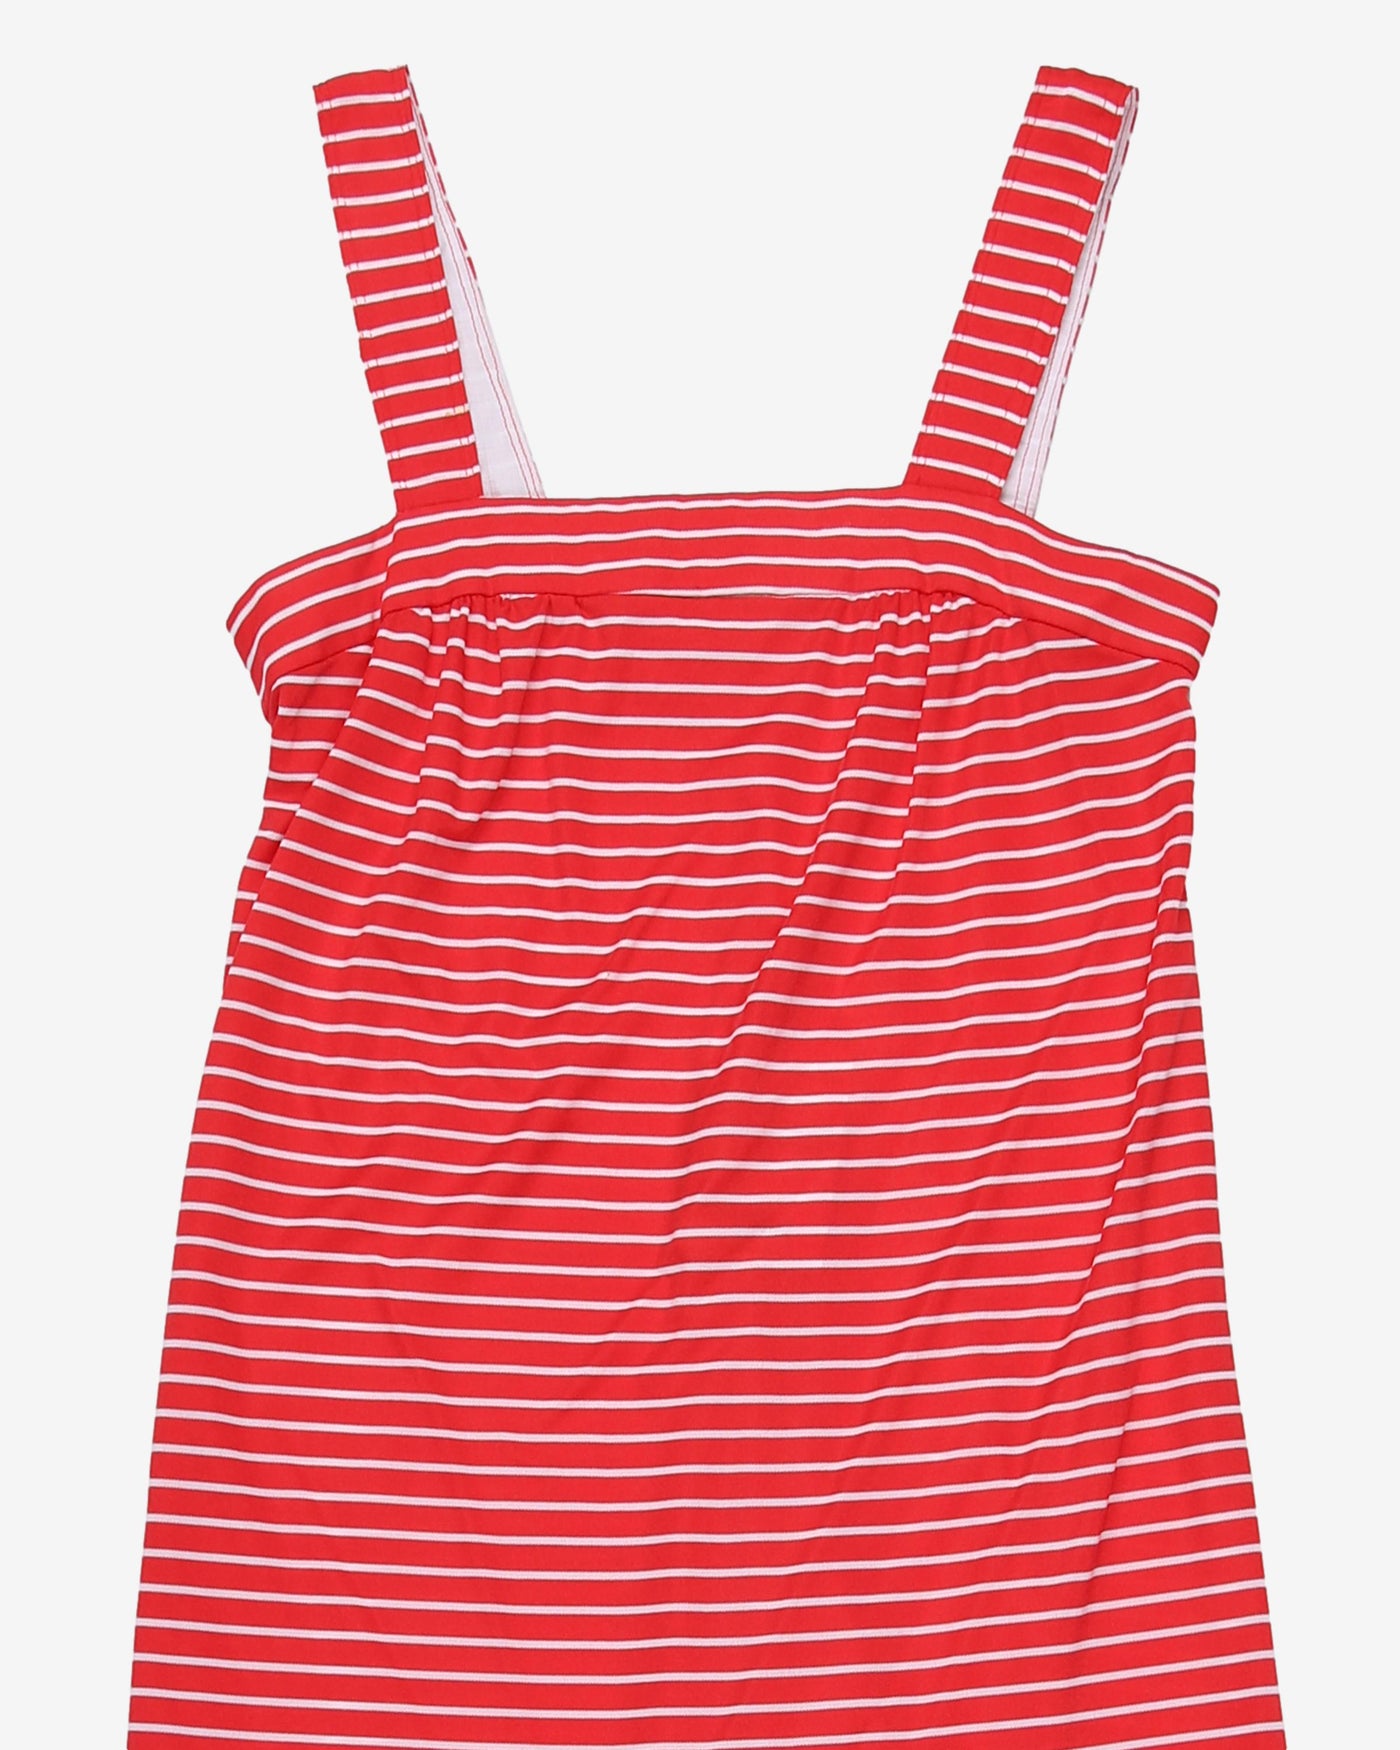 1980s red and white striped sun dress - S